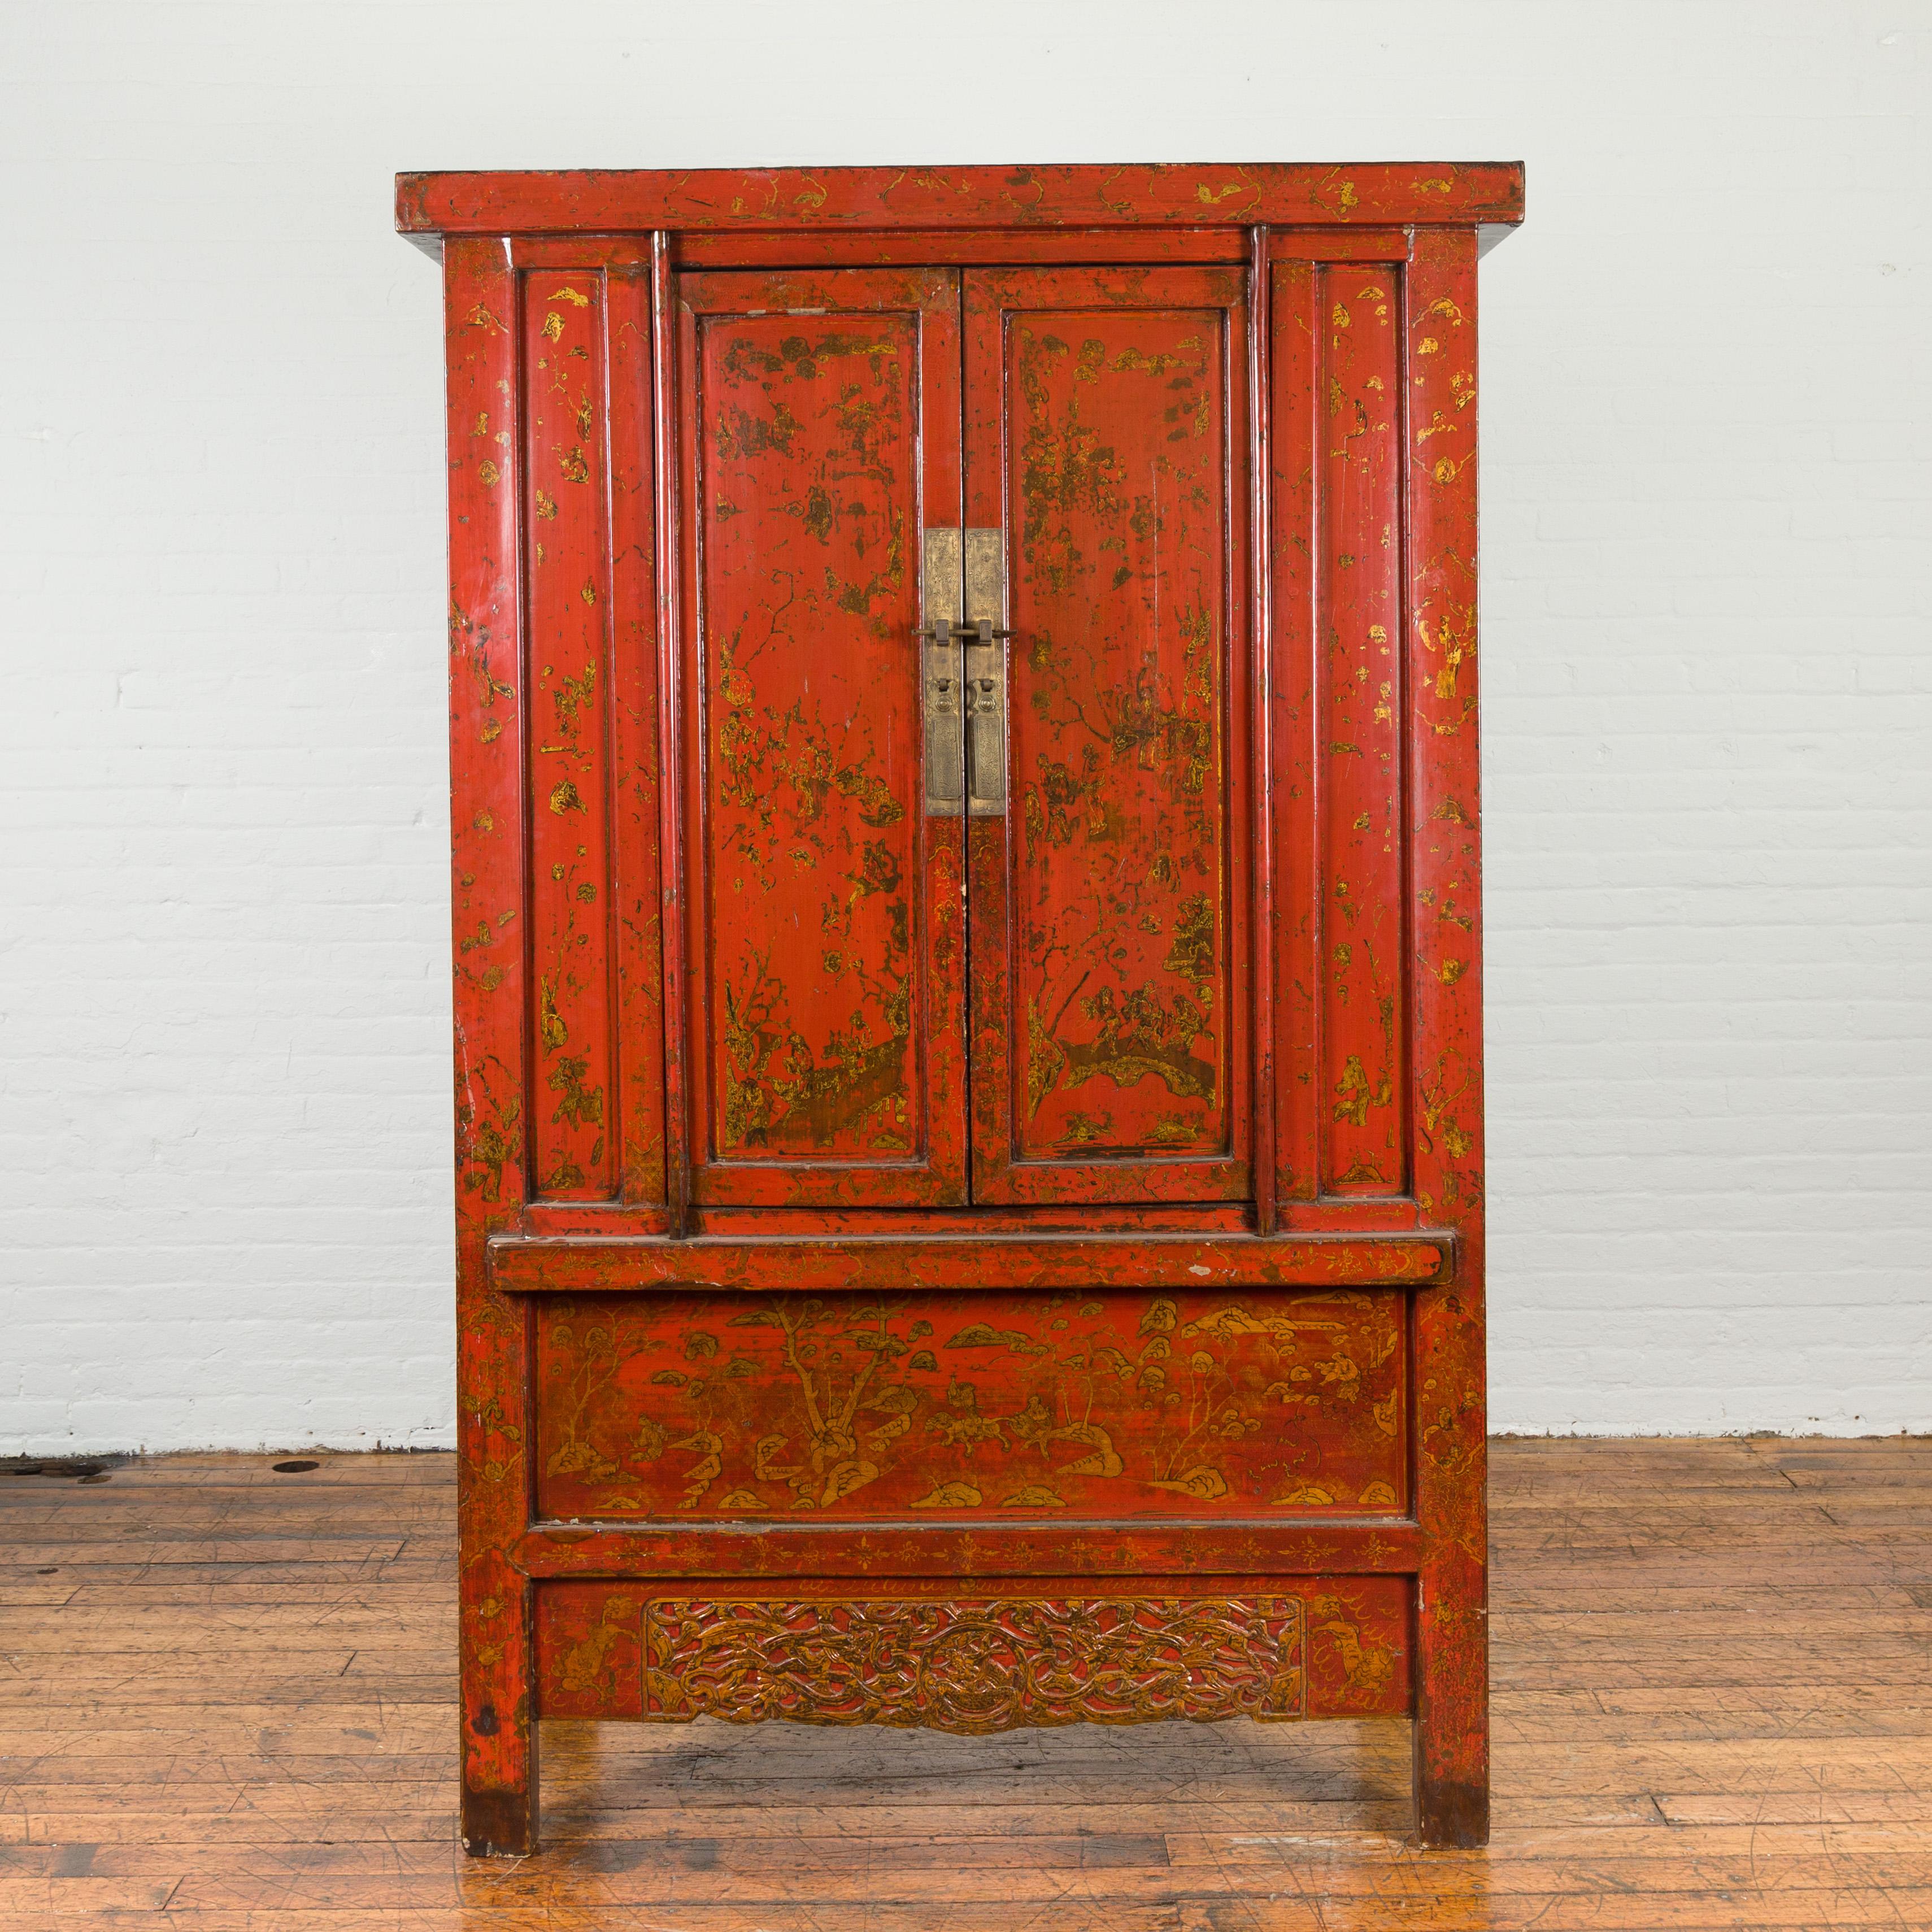 A Chinese Qing Dynasty period cabinet from the 19th century, with original red lacquer, hand-painted golden scenes and carved apron. Created in China during the Qing Dynasty, this red lacquered cabinet features two doors fitted with ornate bronze